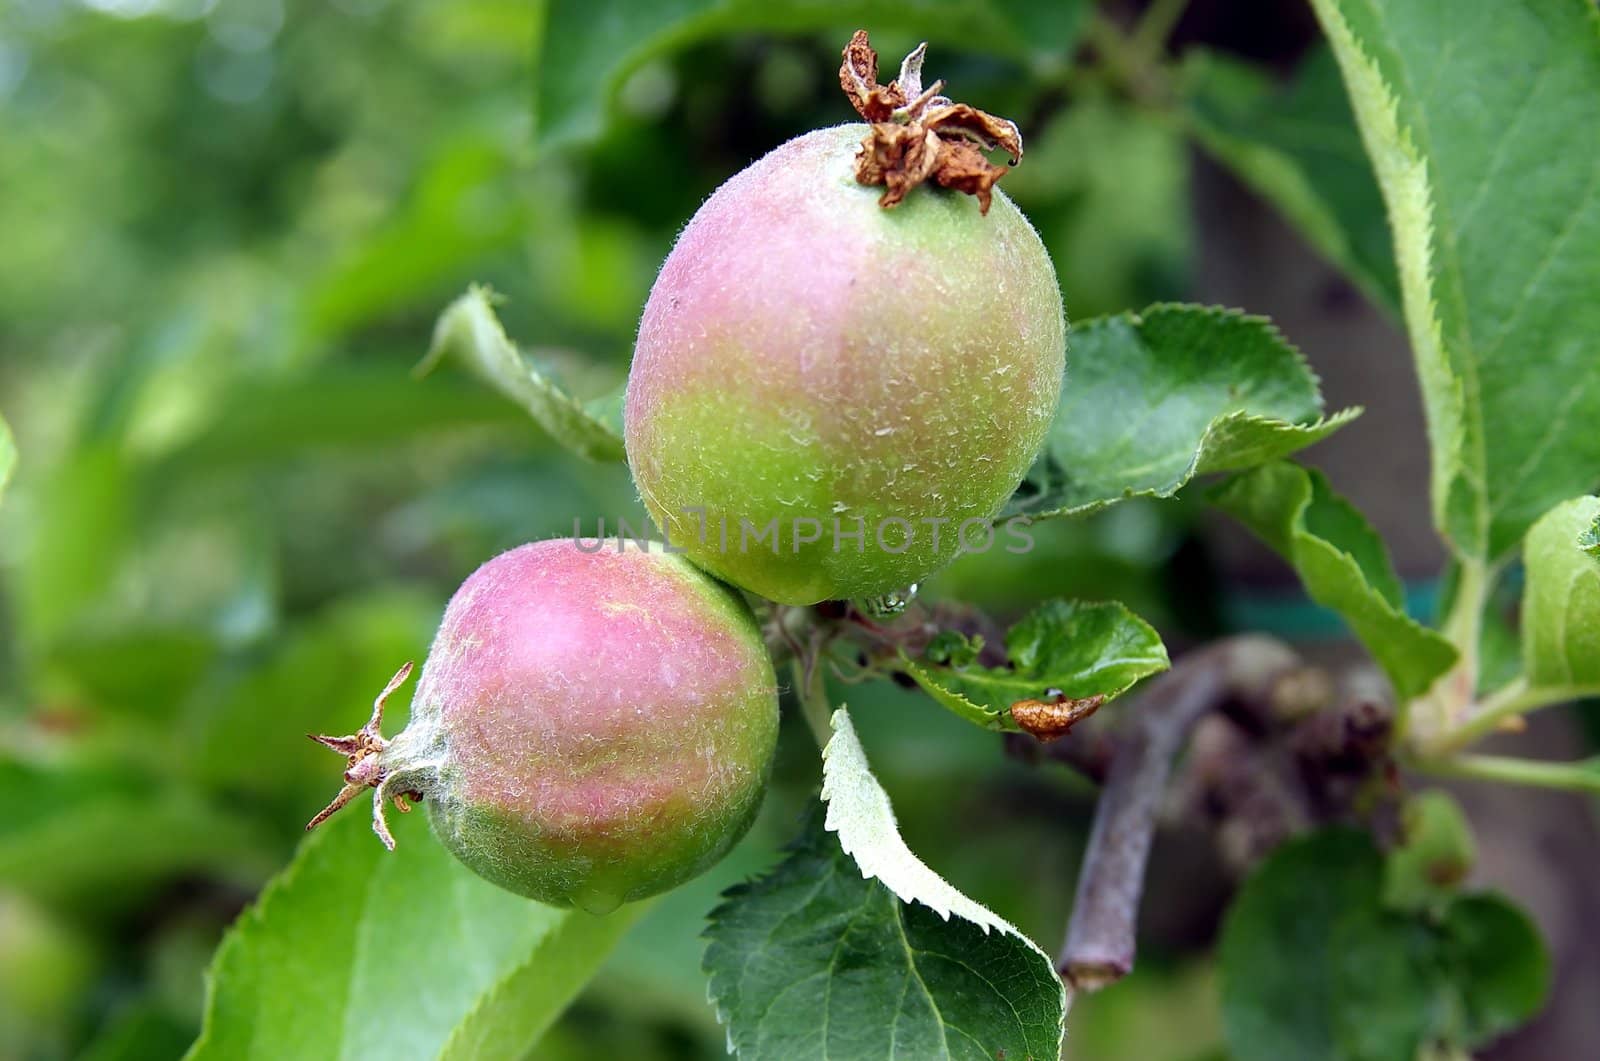 young immature apples